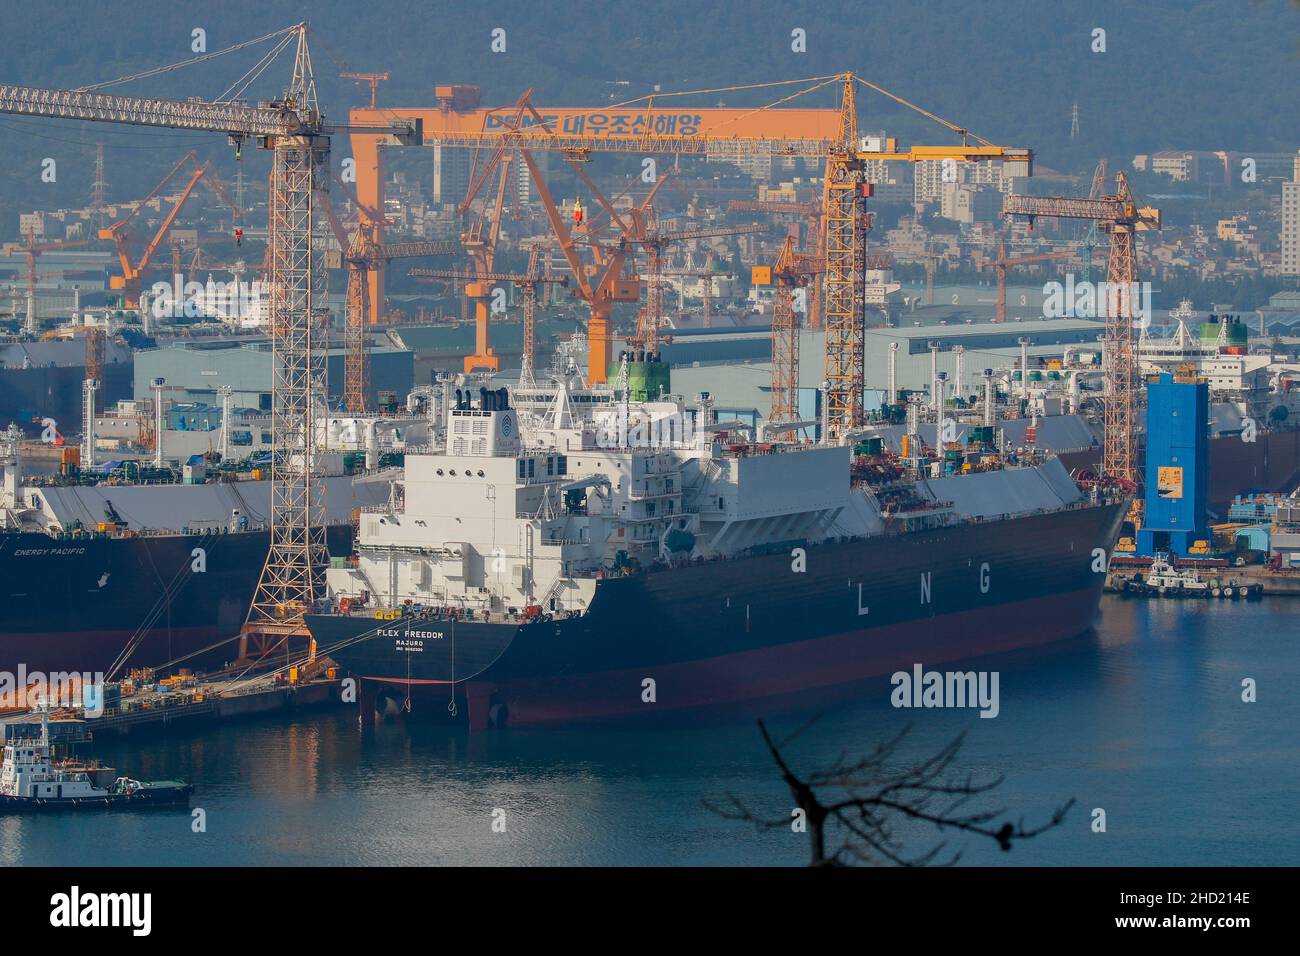 June 24, 2020-Geoje, South Korea-A View of shipbuilding yard scene at samsung heavy industry and DSME in Geoje, South Korea. Stock Photo